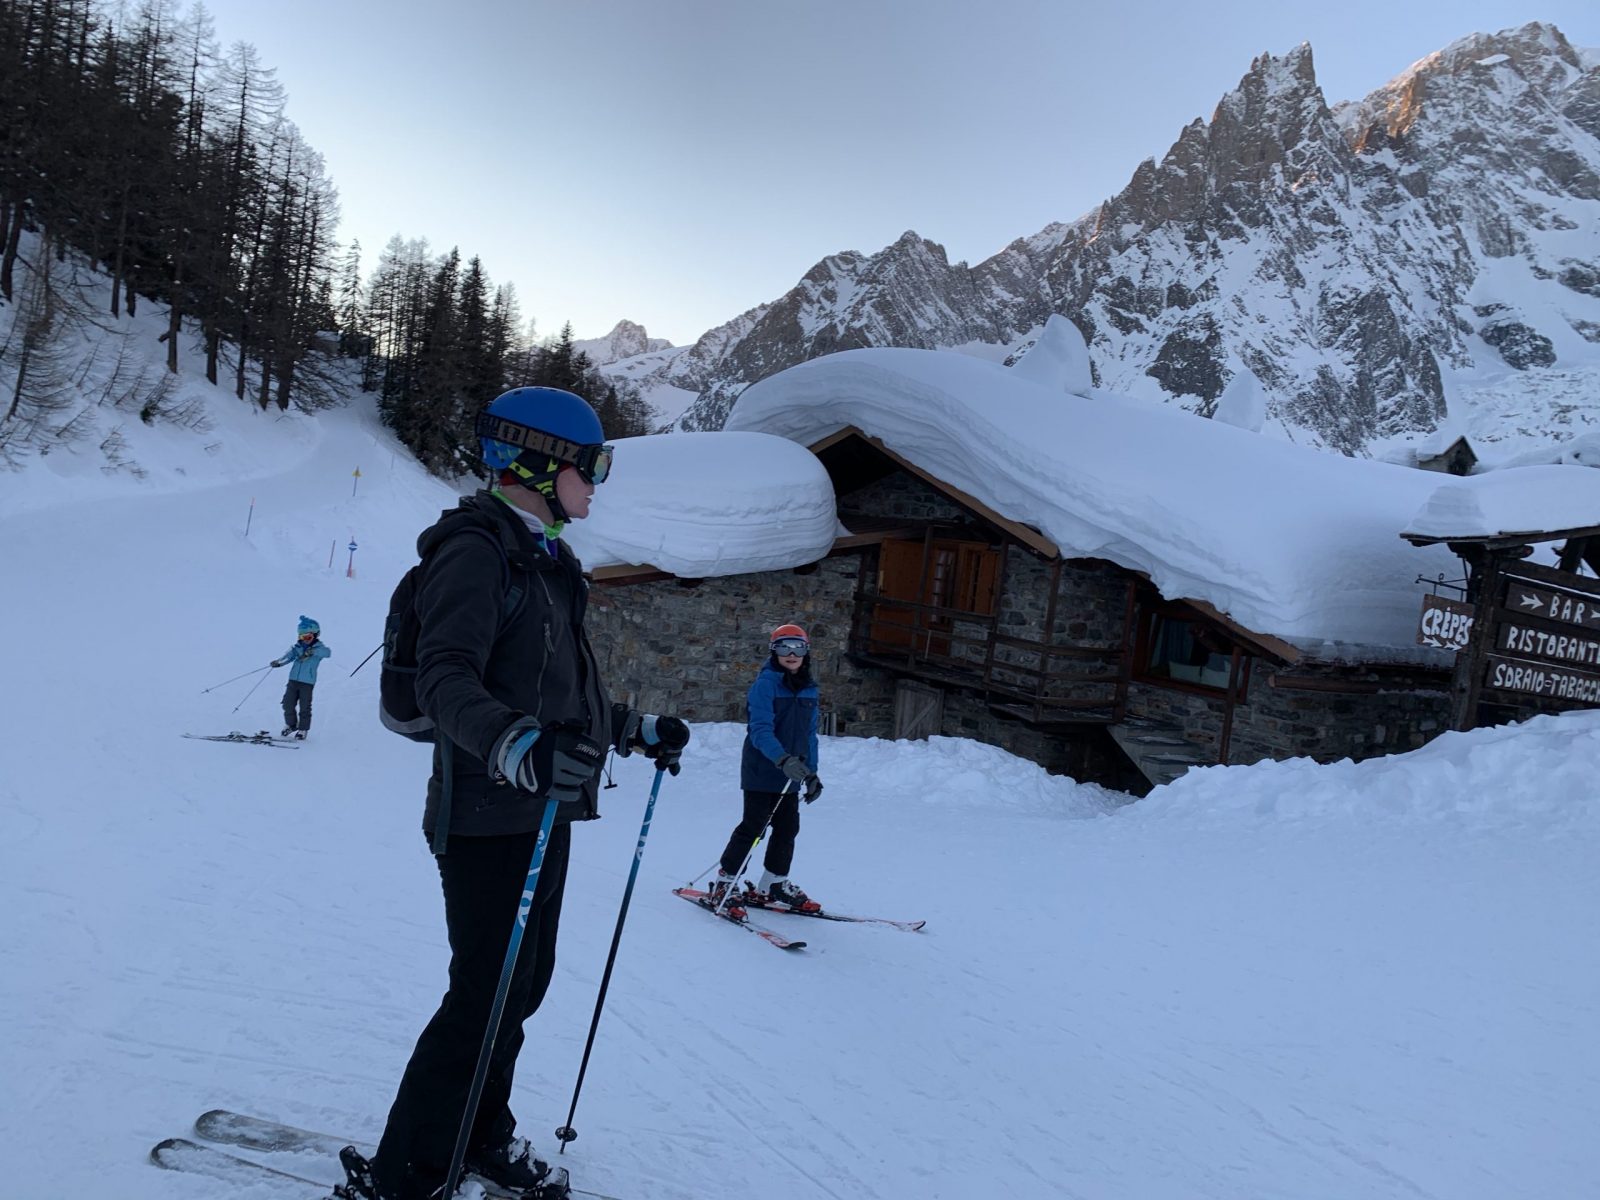 We made it in time to come down with the Val Veny funicular...at certain time I was doubting we were going to get in time! Our Christmas holidays in the mountains with the kids and our dog! Courmayeur, Aosta.